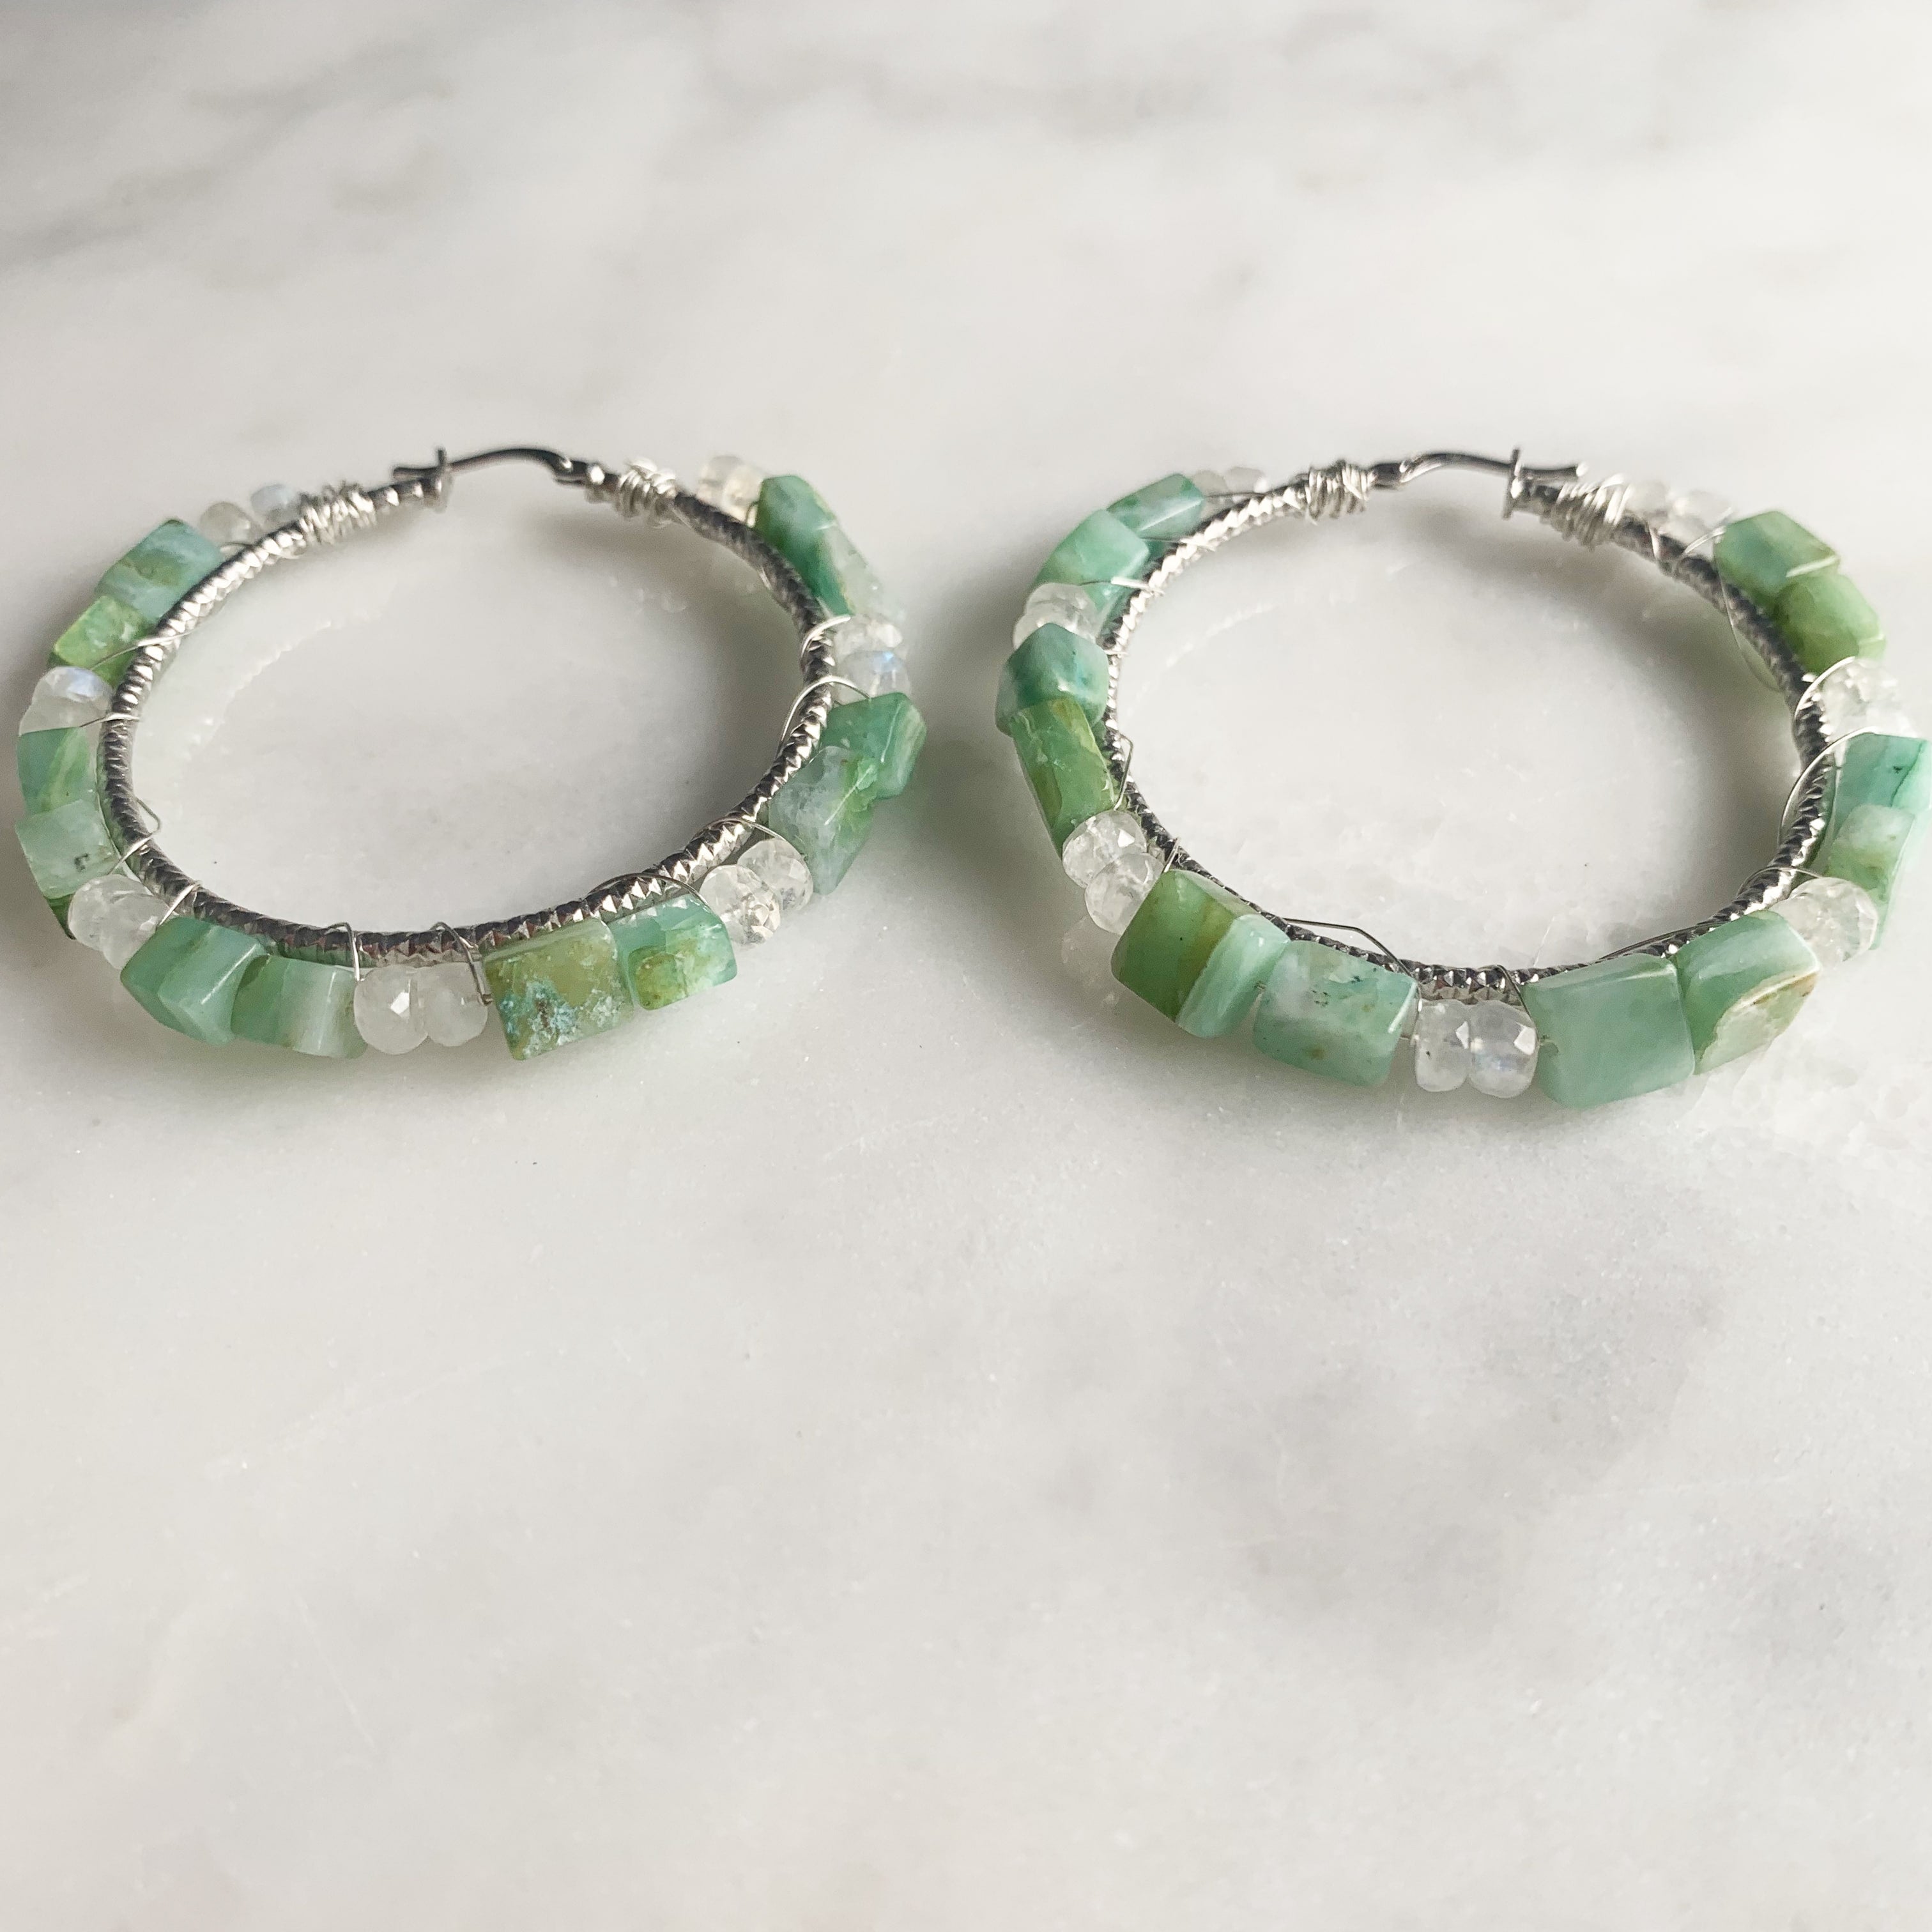 Peruvian Opal and Moonstone Hoops